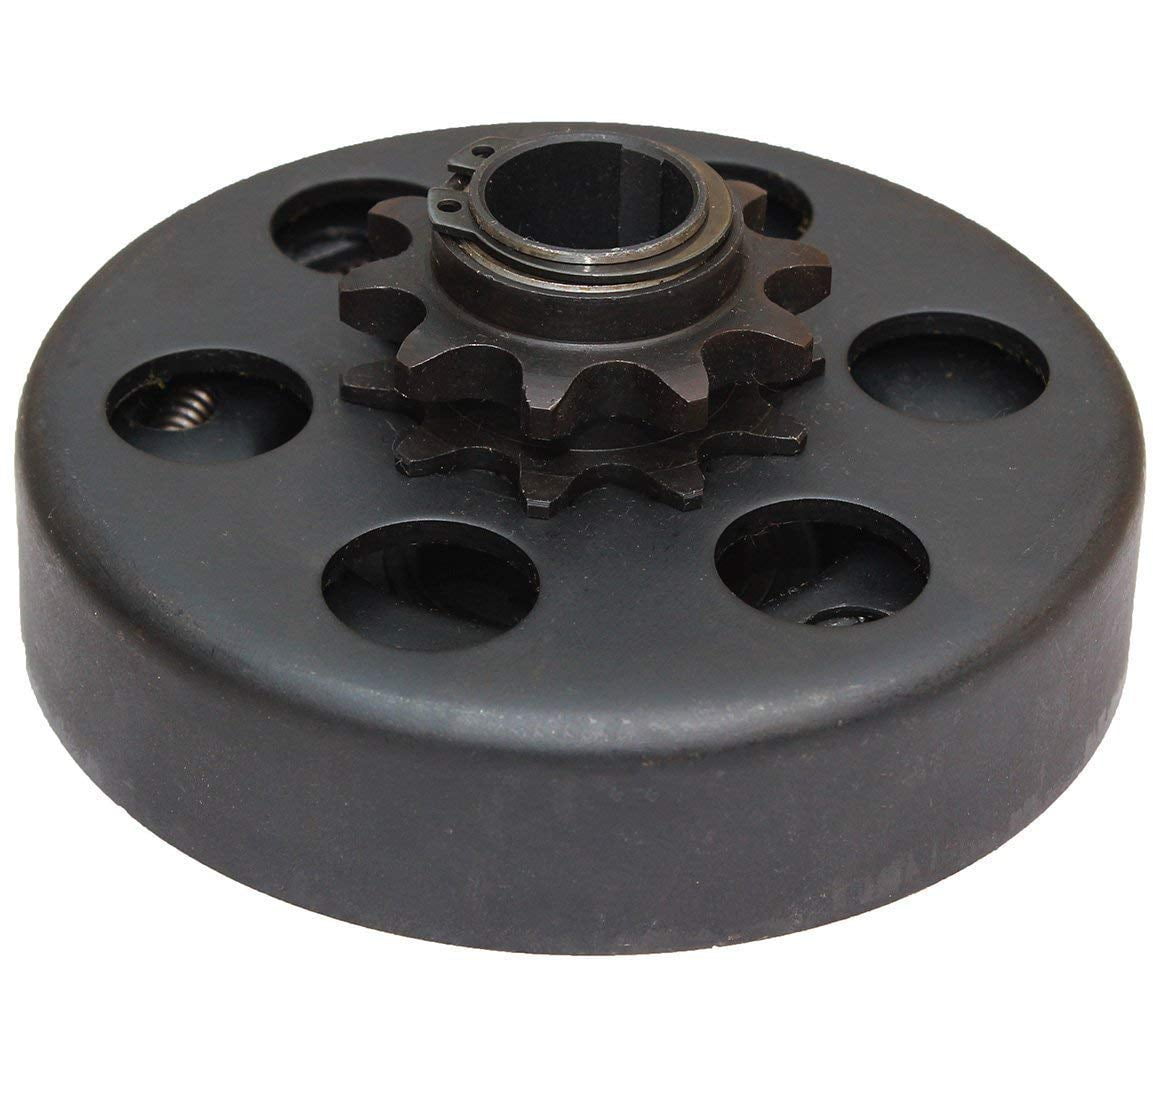 CLUTCH ASSEMBLY compatible with HAMMERHEAD TORPEDO Mini SHARK, Stingray ...